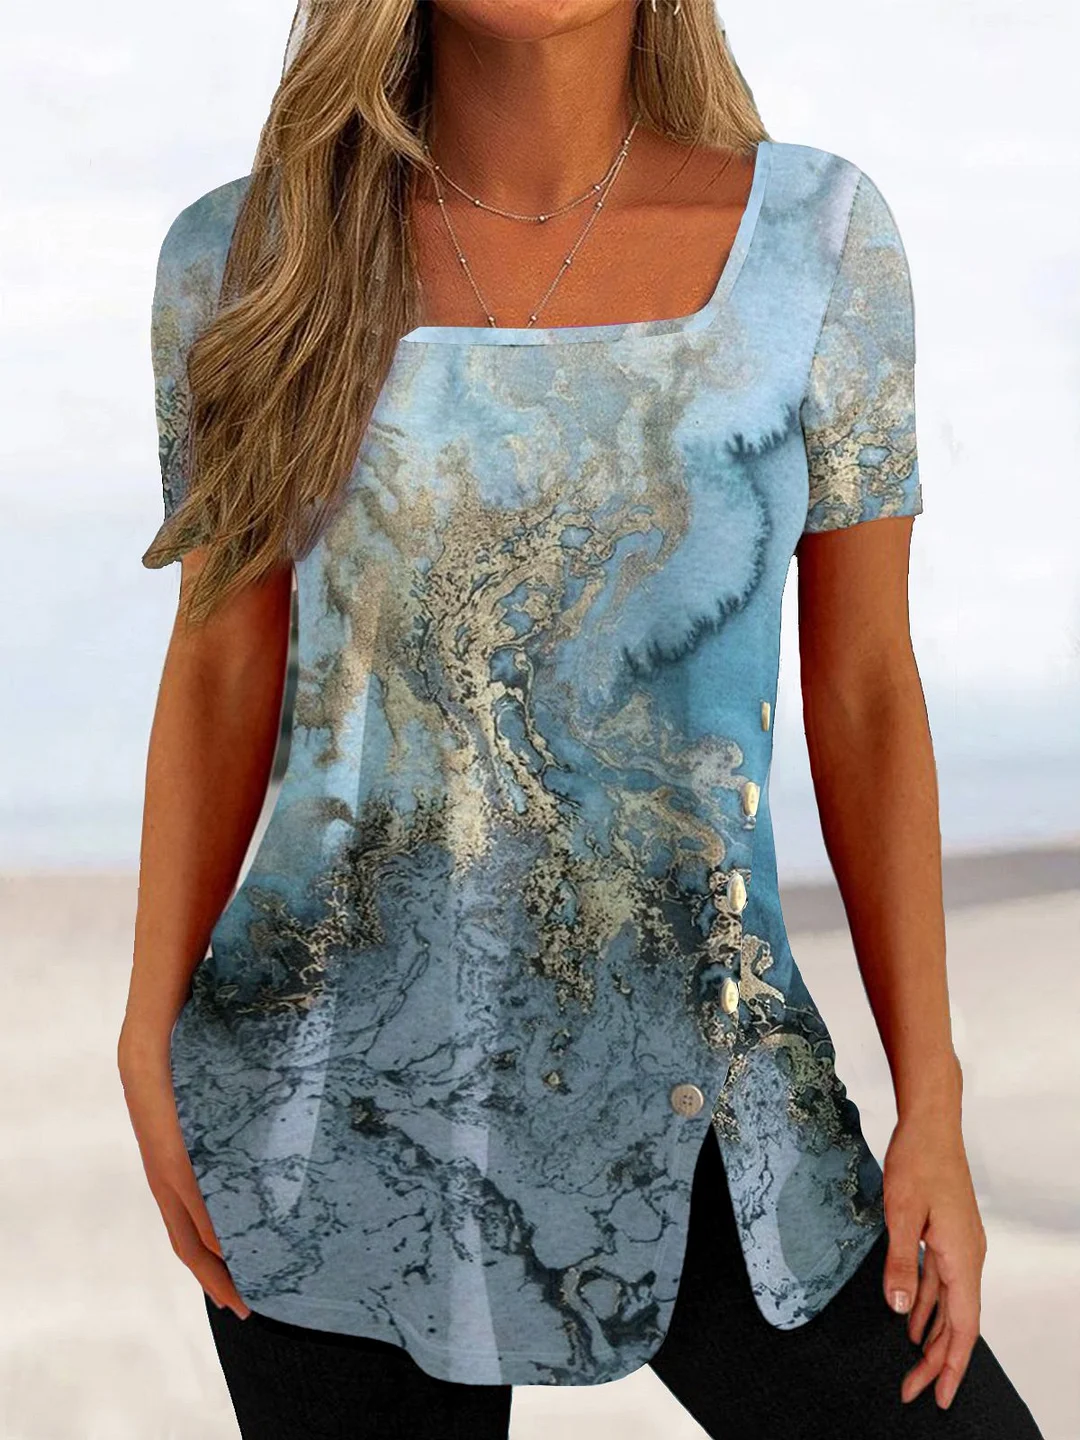 Women's Weekend Daily Casual Sea Short Sleeve Square Neck Printed Top Button Tunic T-Shirt